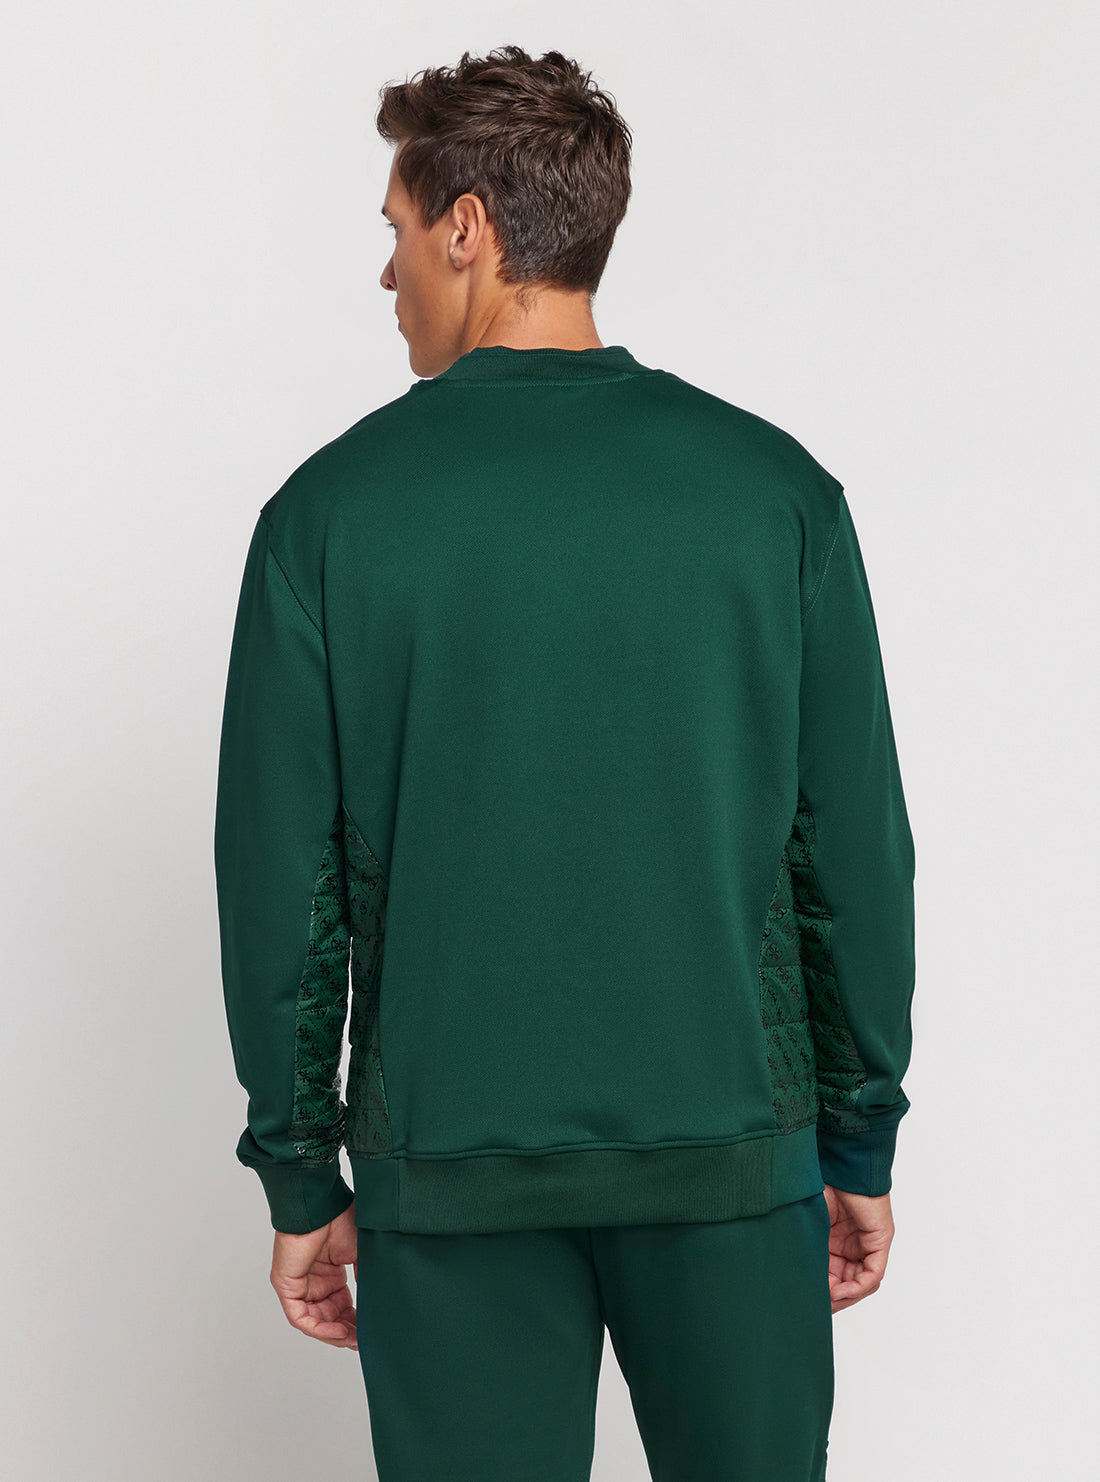 GUESS Green Gaston Crew Neck Jumper back view